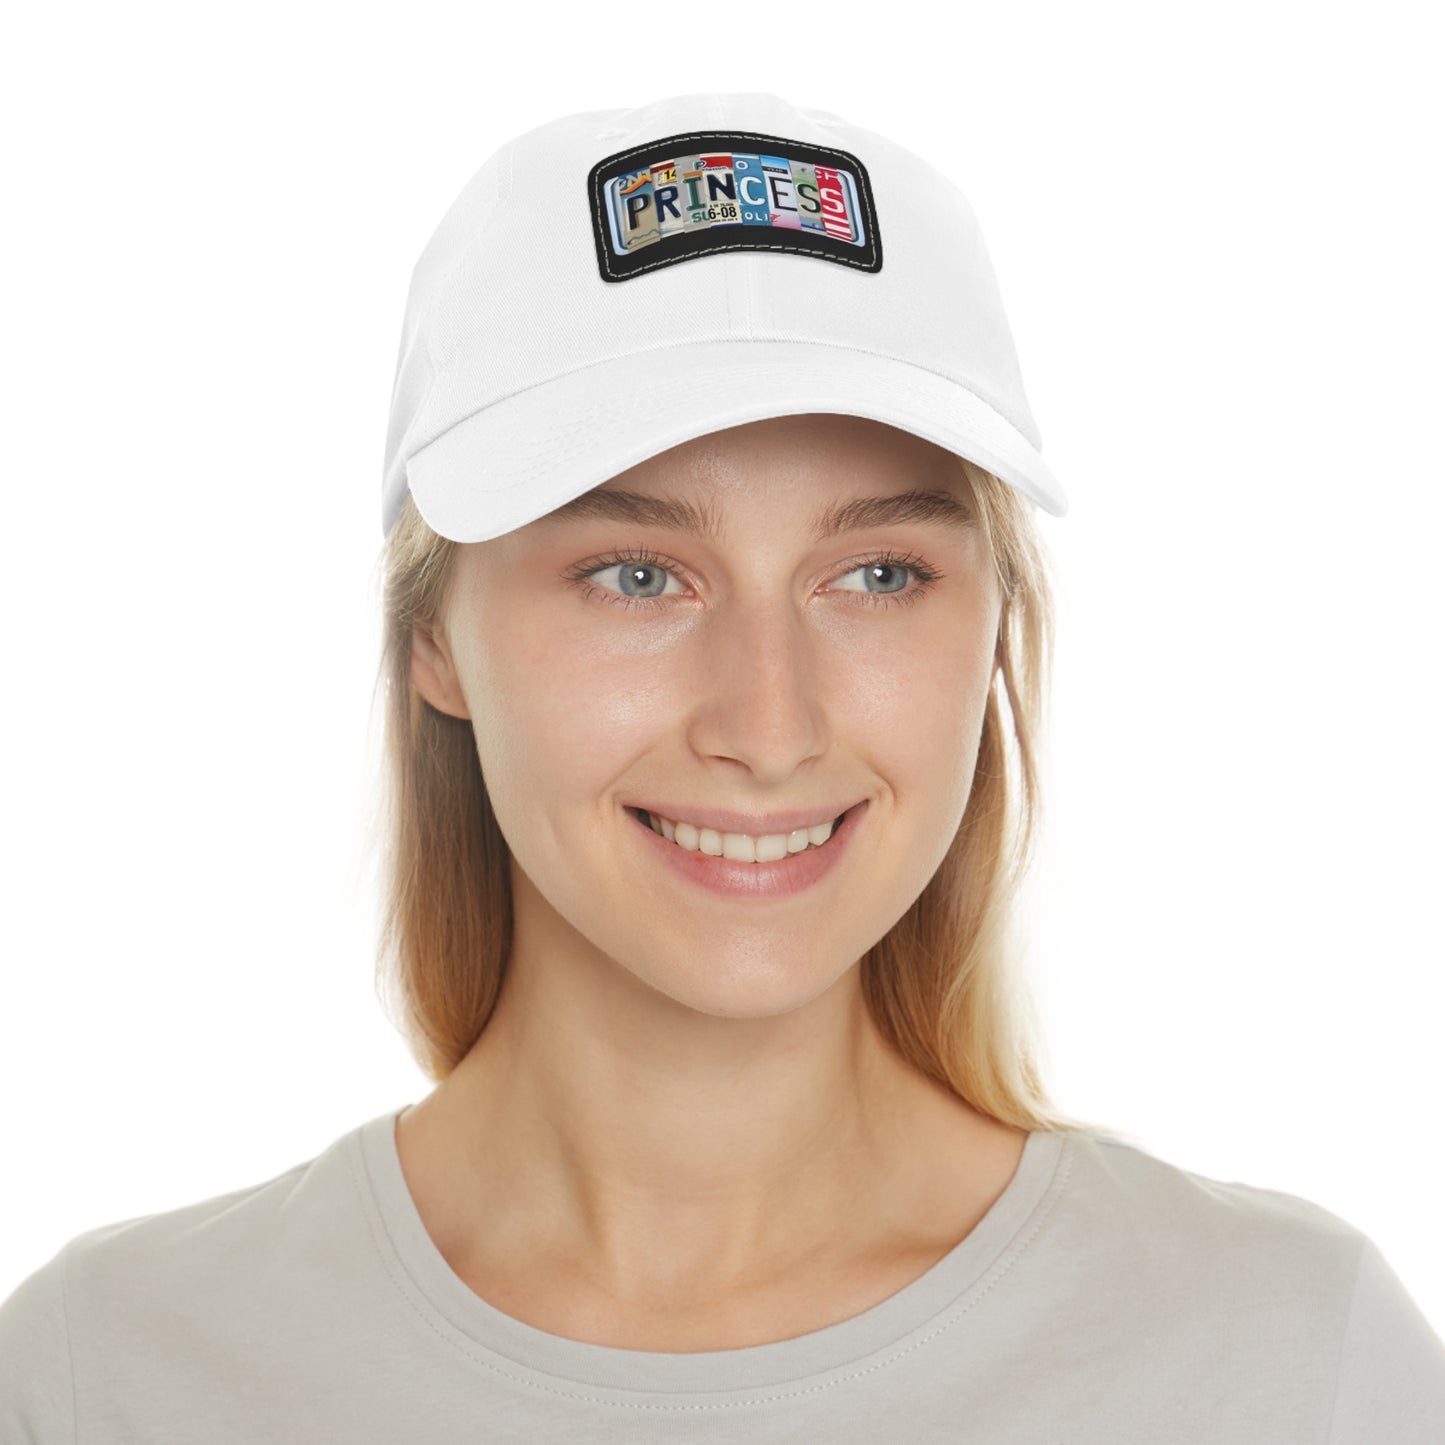 Elegant 'Princess' Dad Hat with Rectangular Leather Patch